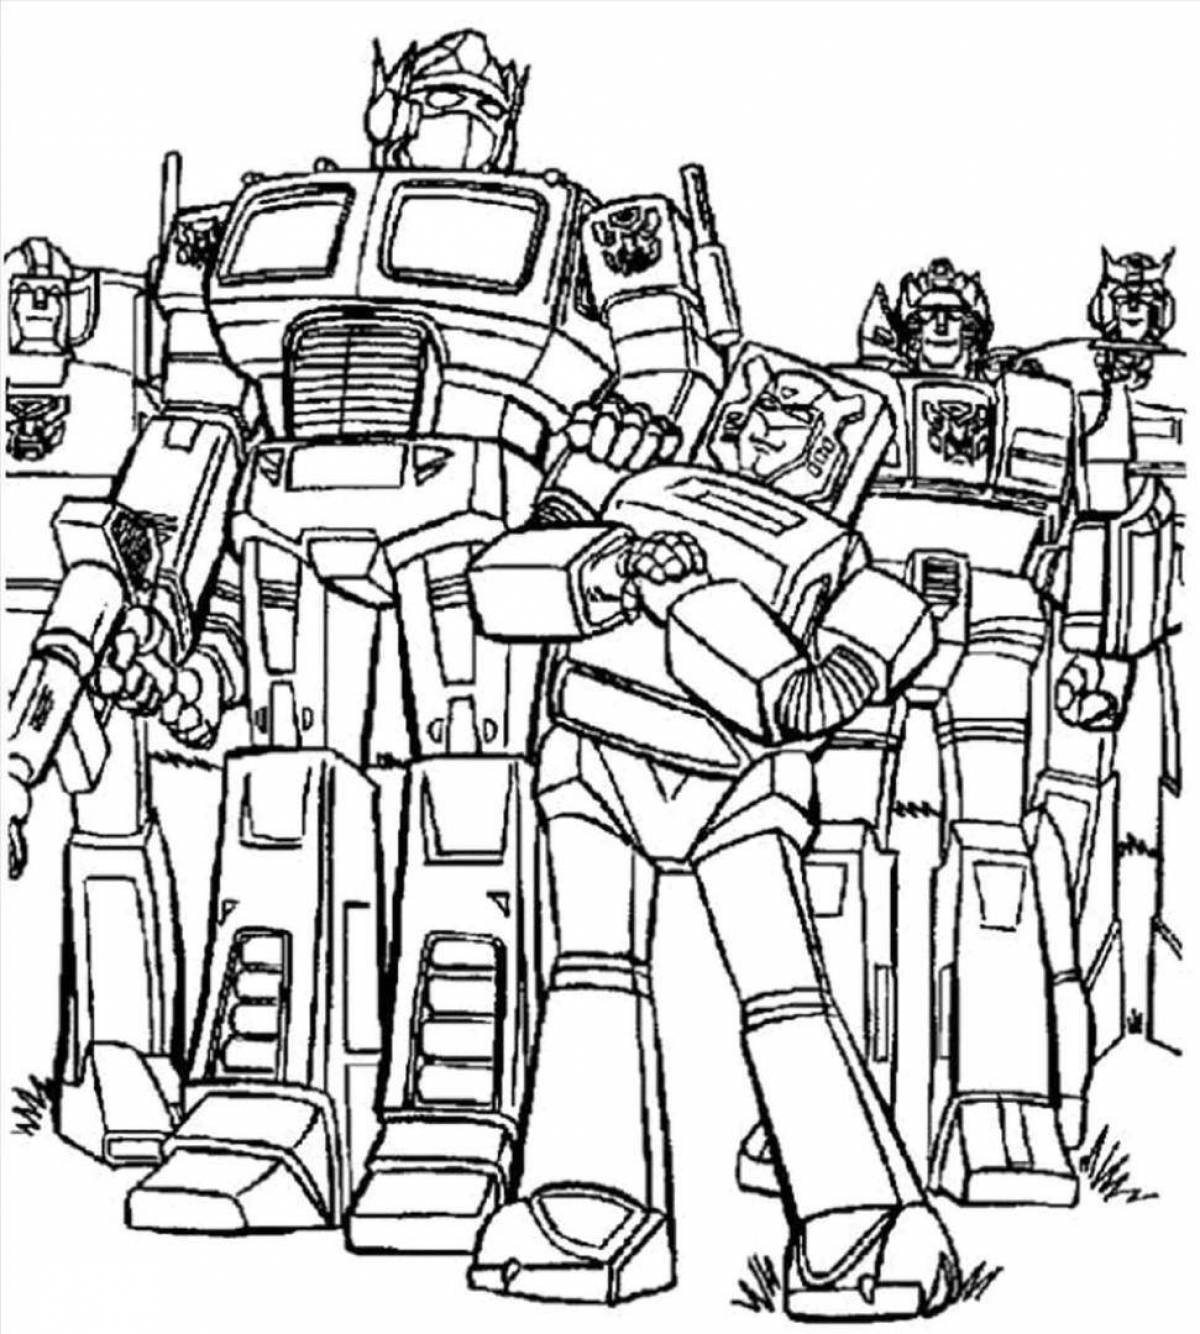 Awesome optimus prime car coloring page